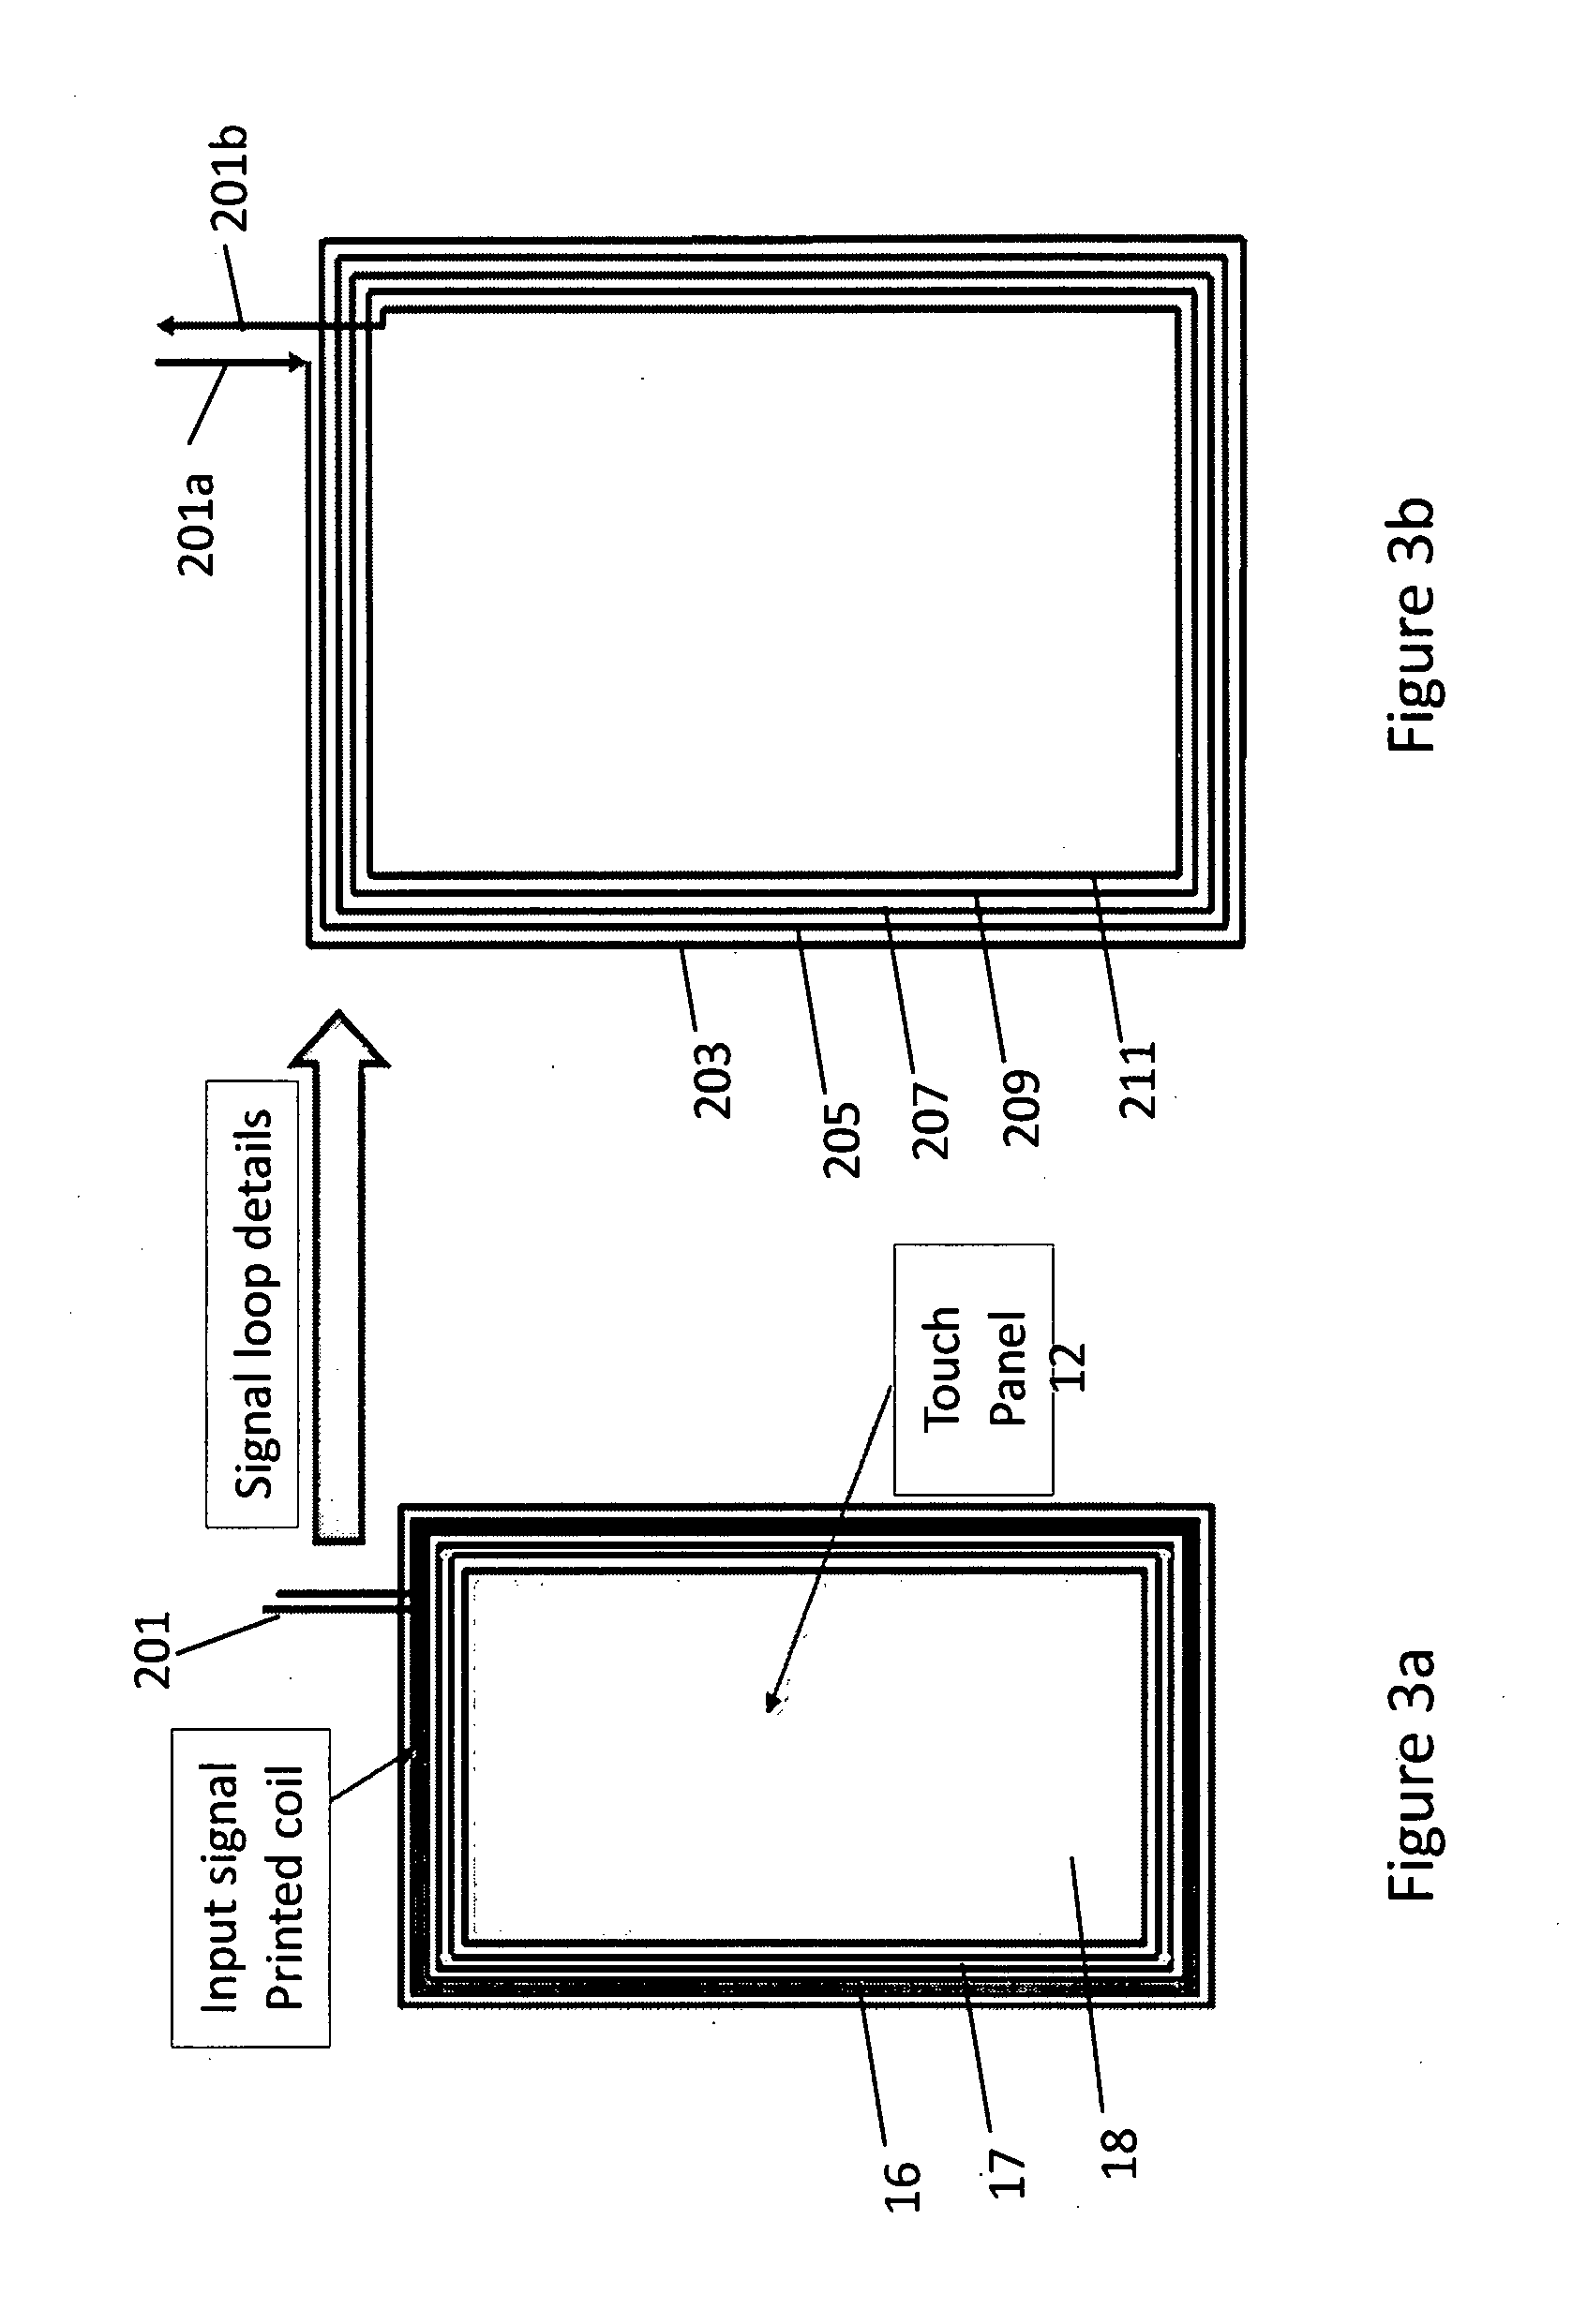 Apparatus and a method for metal detection involving a mobile terminal with a display